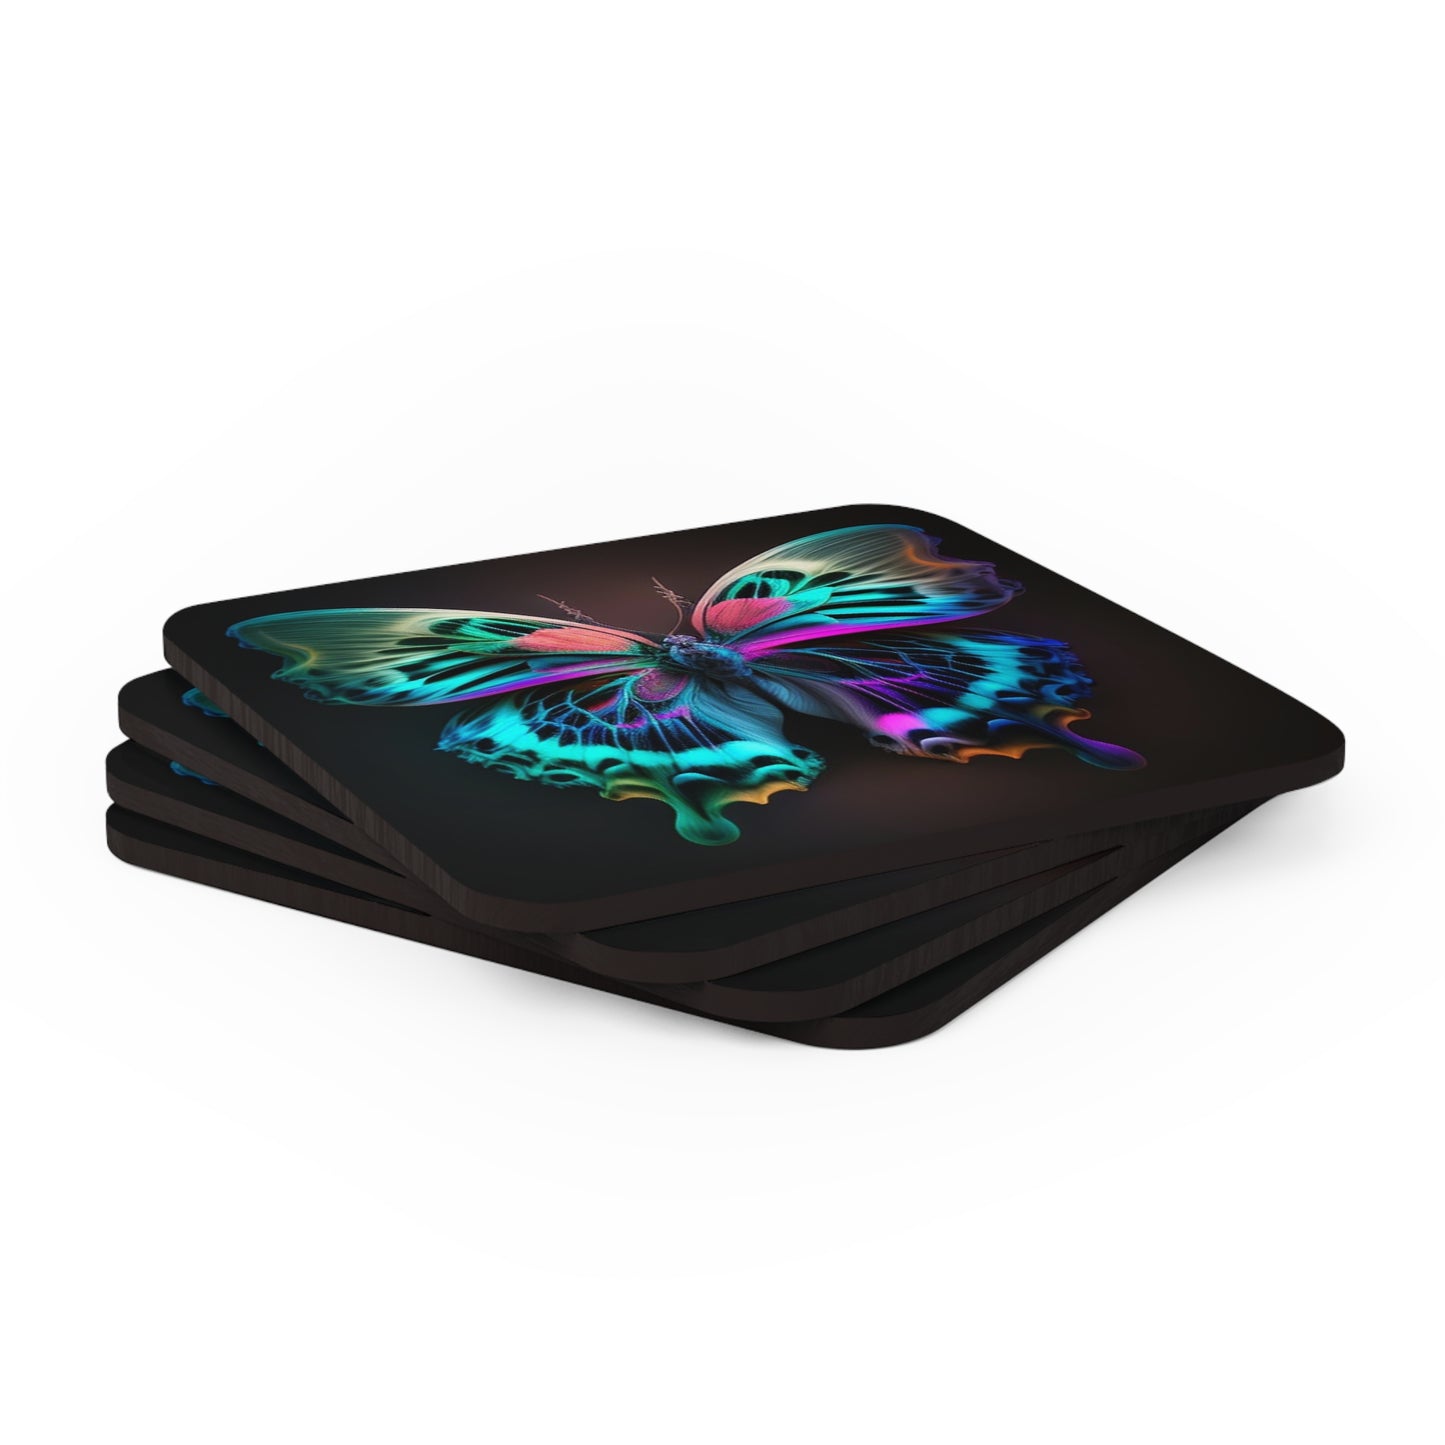 Corkwood Coaster Set Neon Butterfly Fusion 1